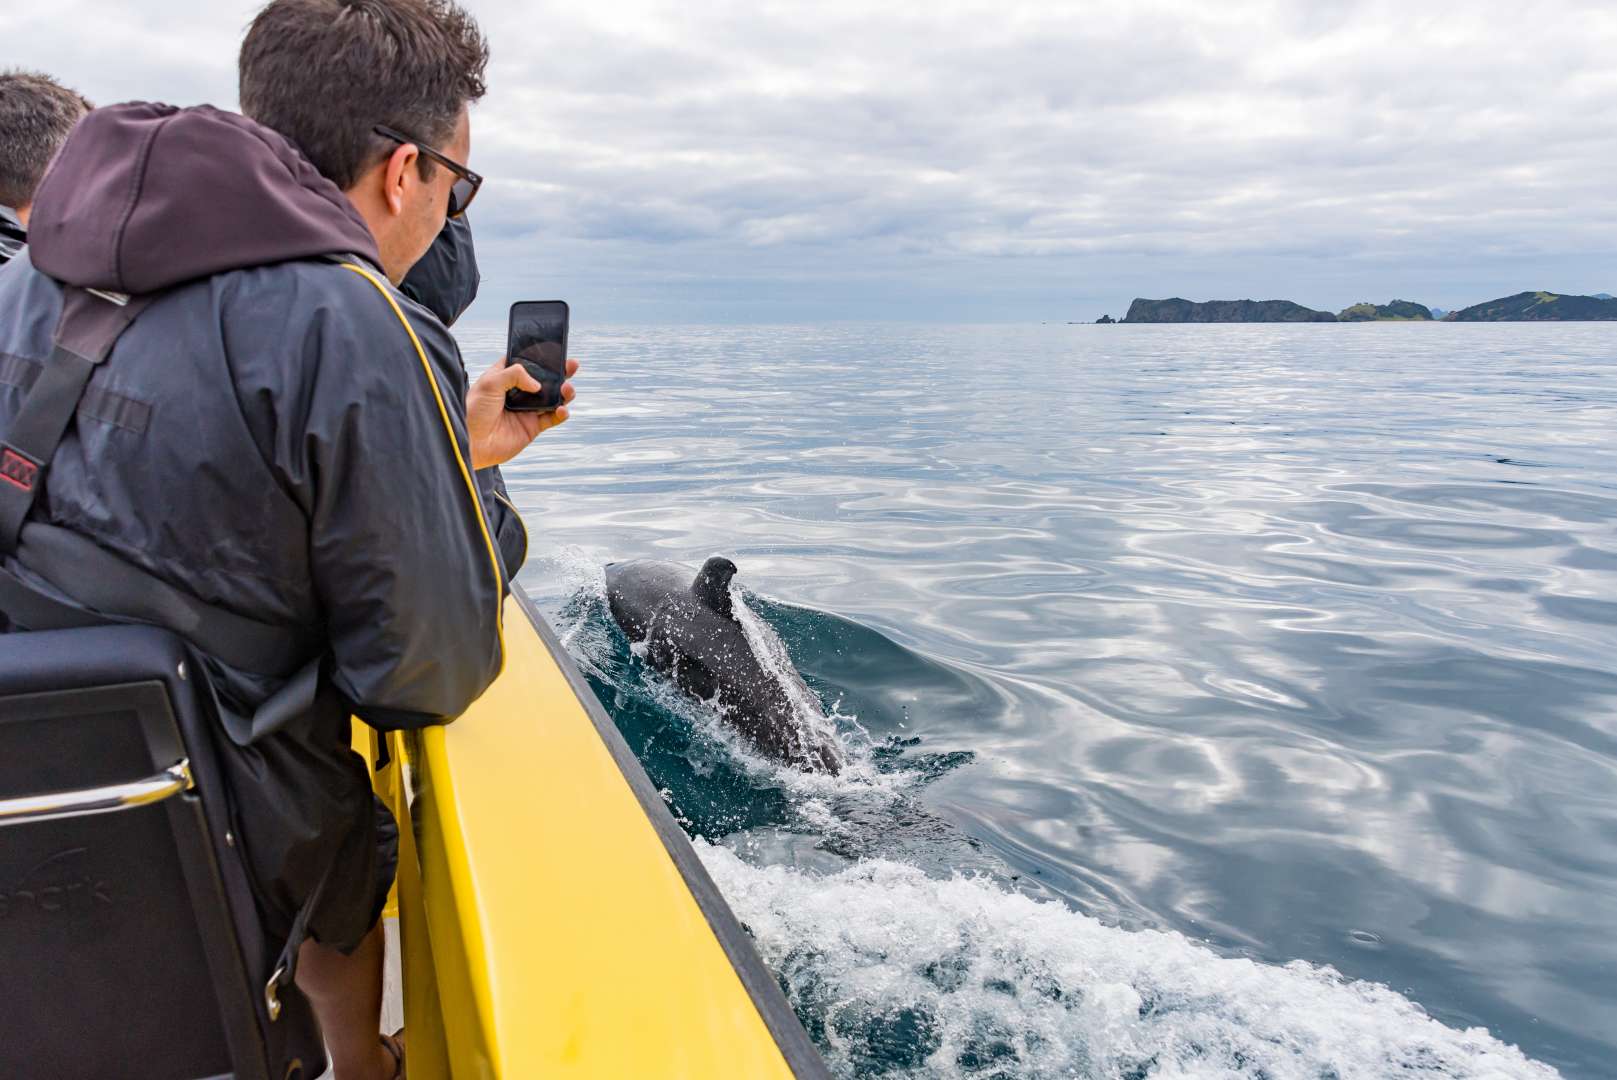 Ocean Adventure Sightseeing with Dolphins Things to Do In Paihia